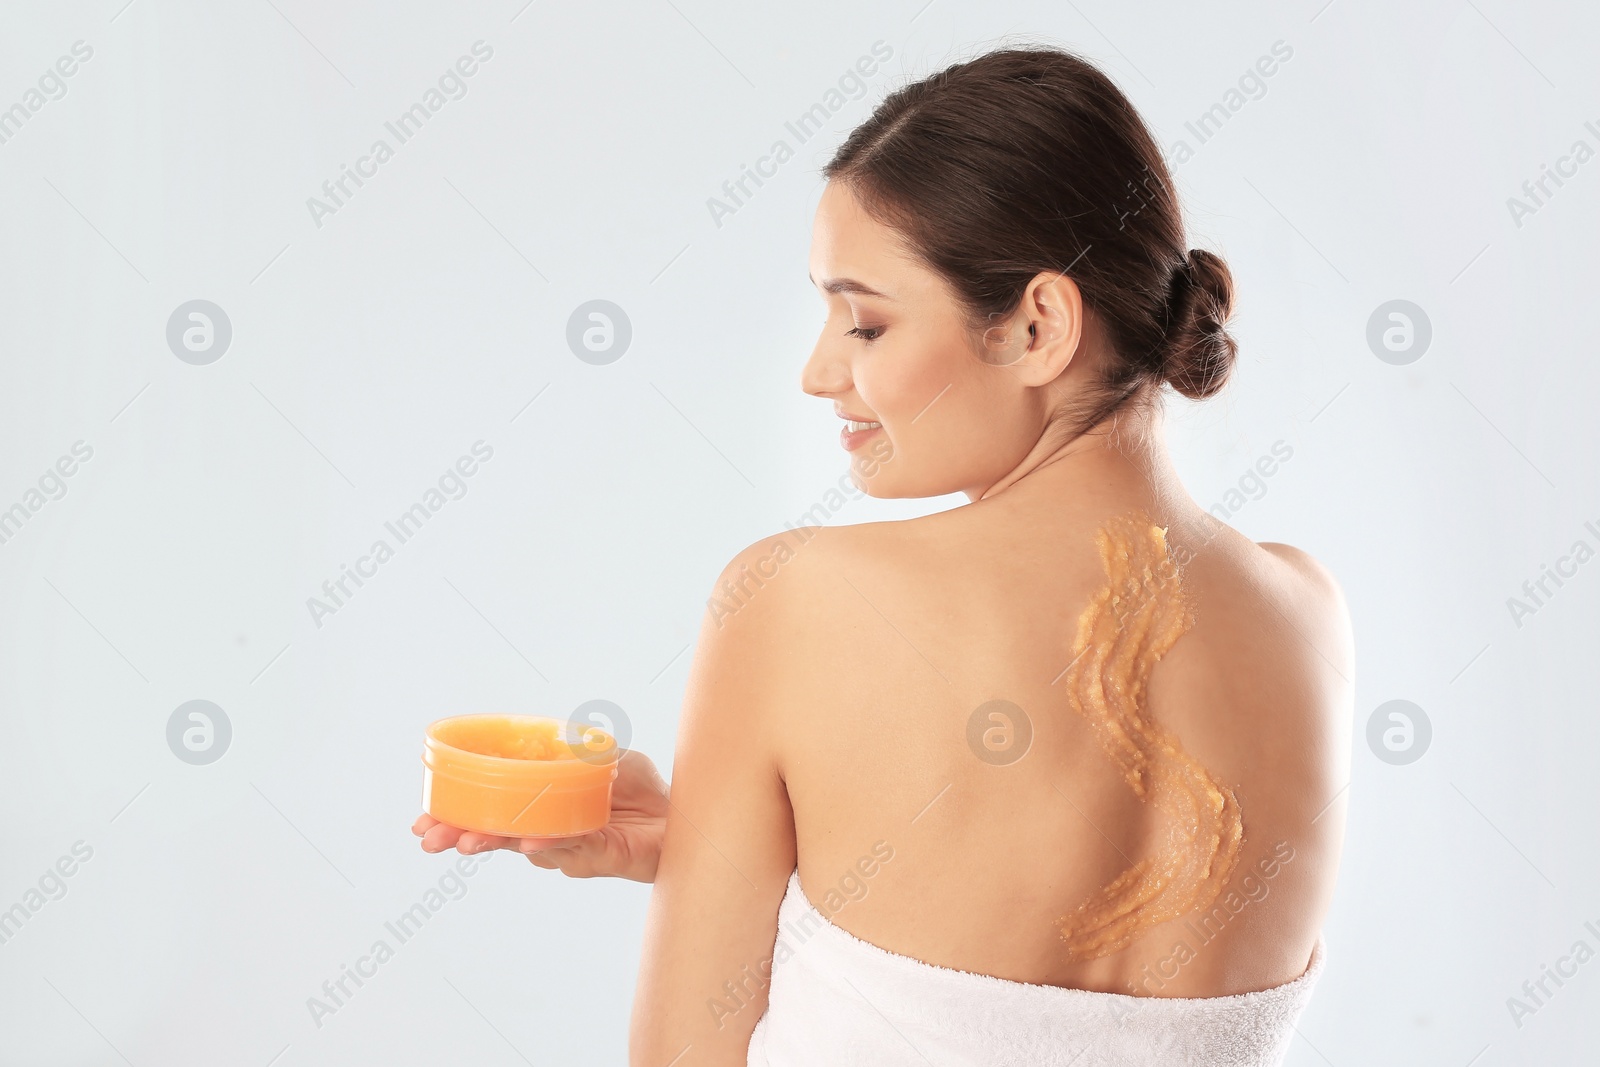 Photo of Young woman applying natural scrub on her body against light background